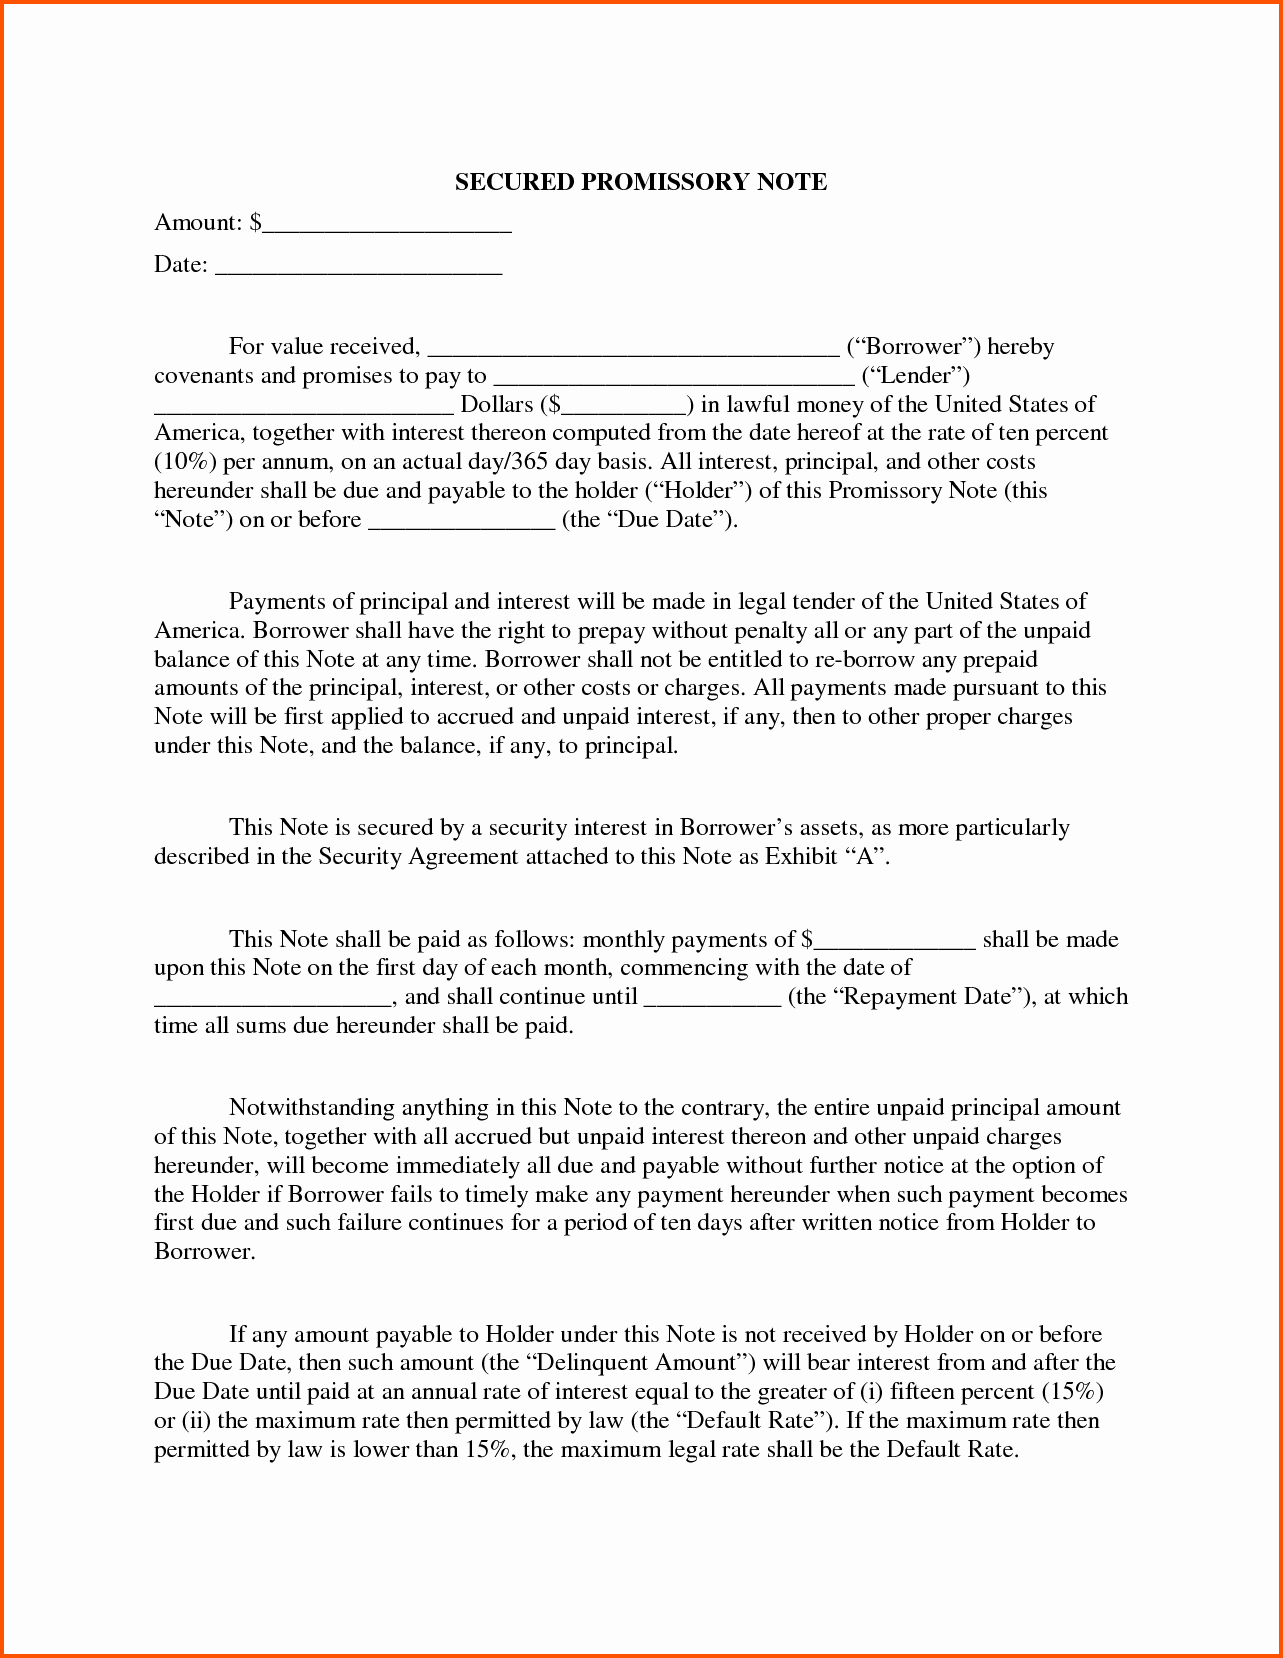 Secured Promissory Note Template Awesome Secured Promissory Note